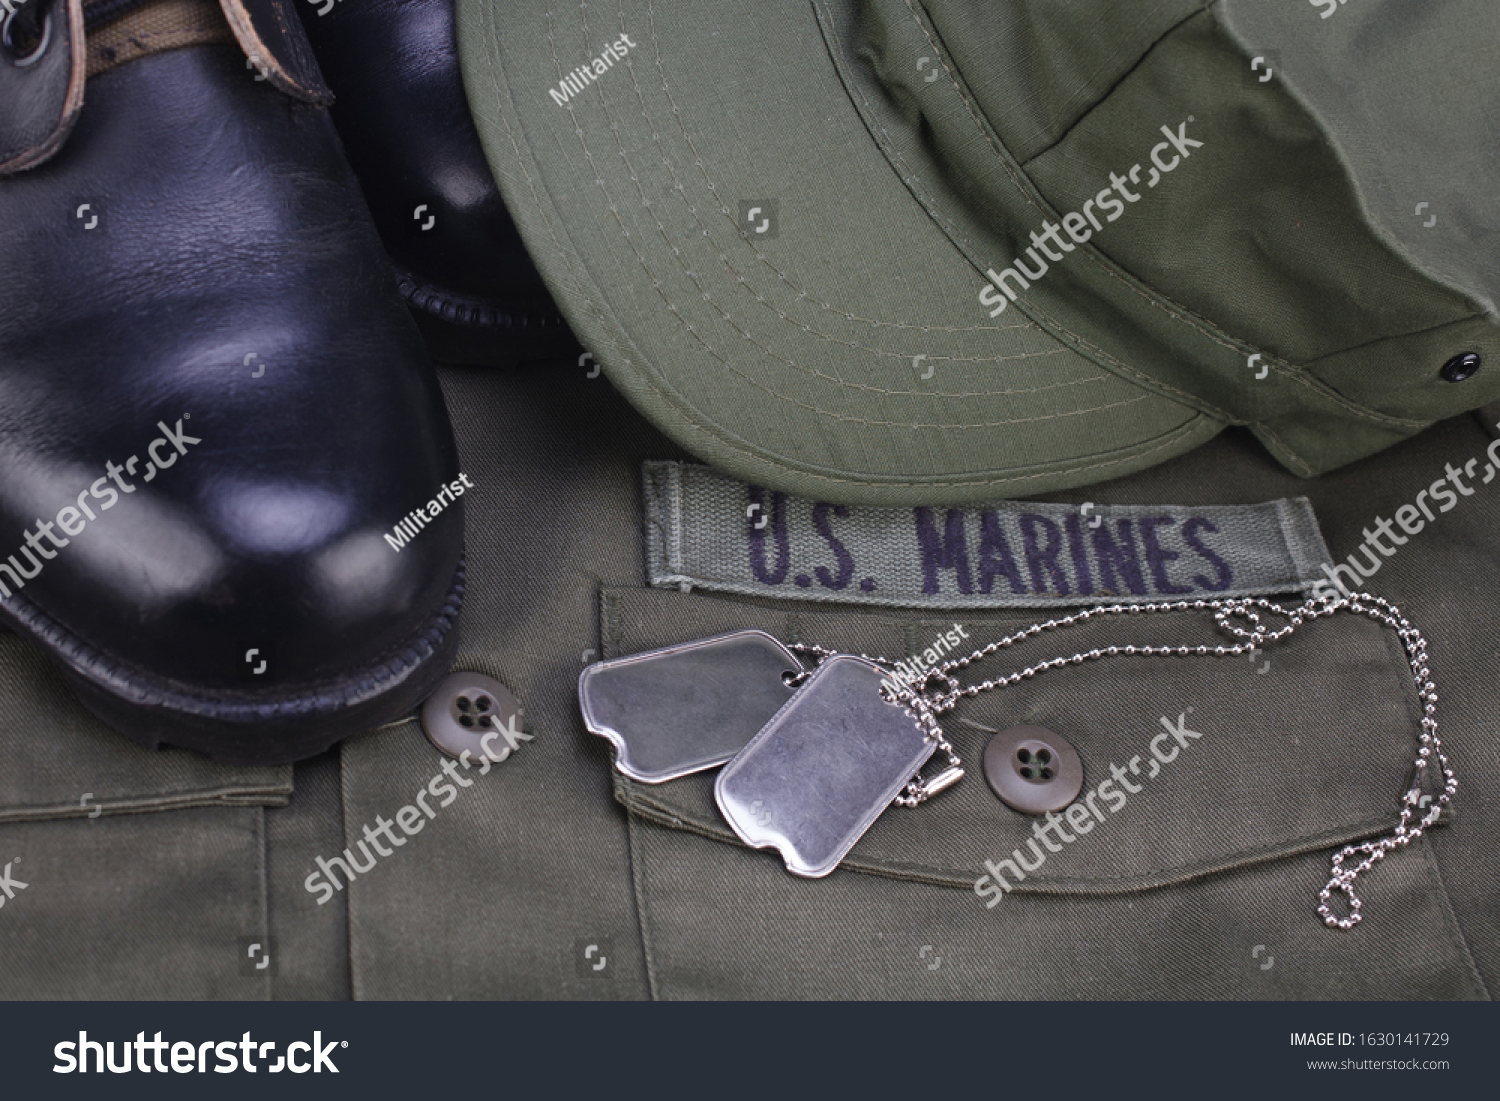 U.S. MARINES Branch Tape with dog tags and boots on olive green uniform background #1630141729